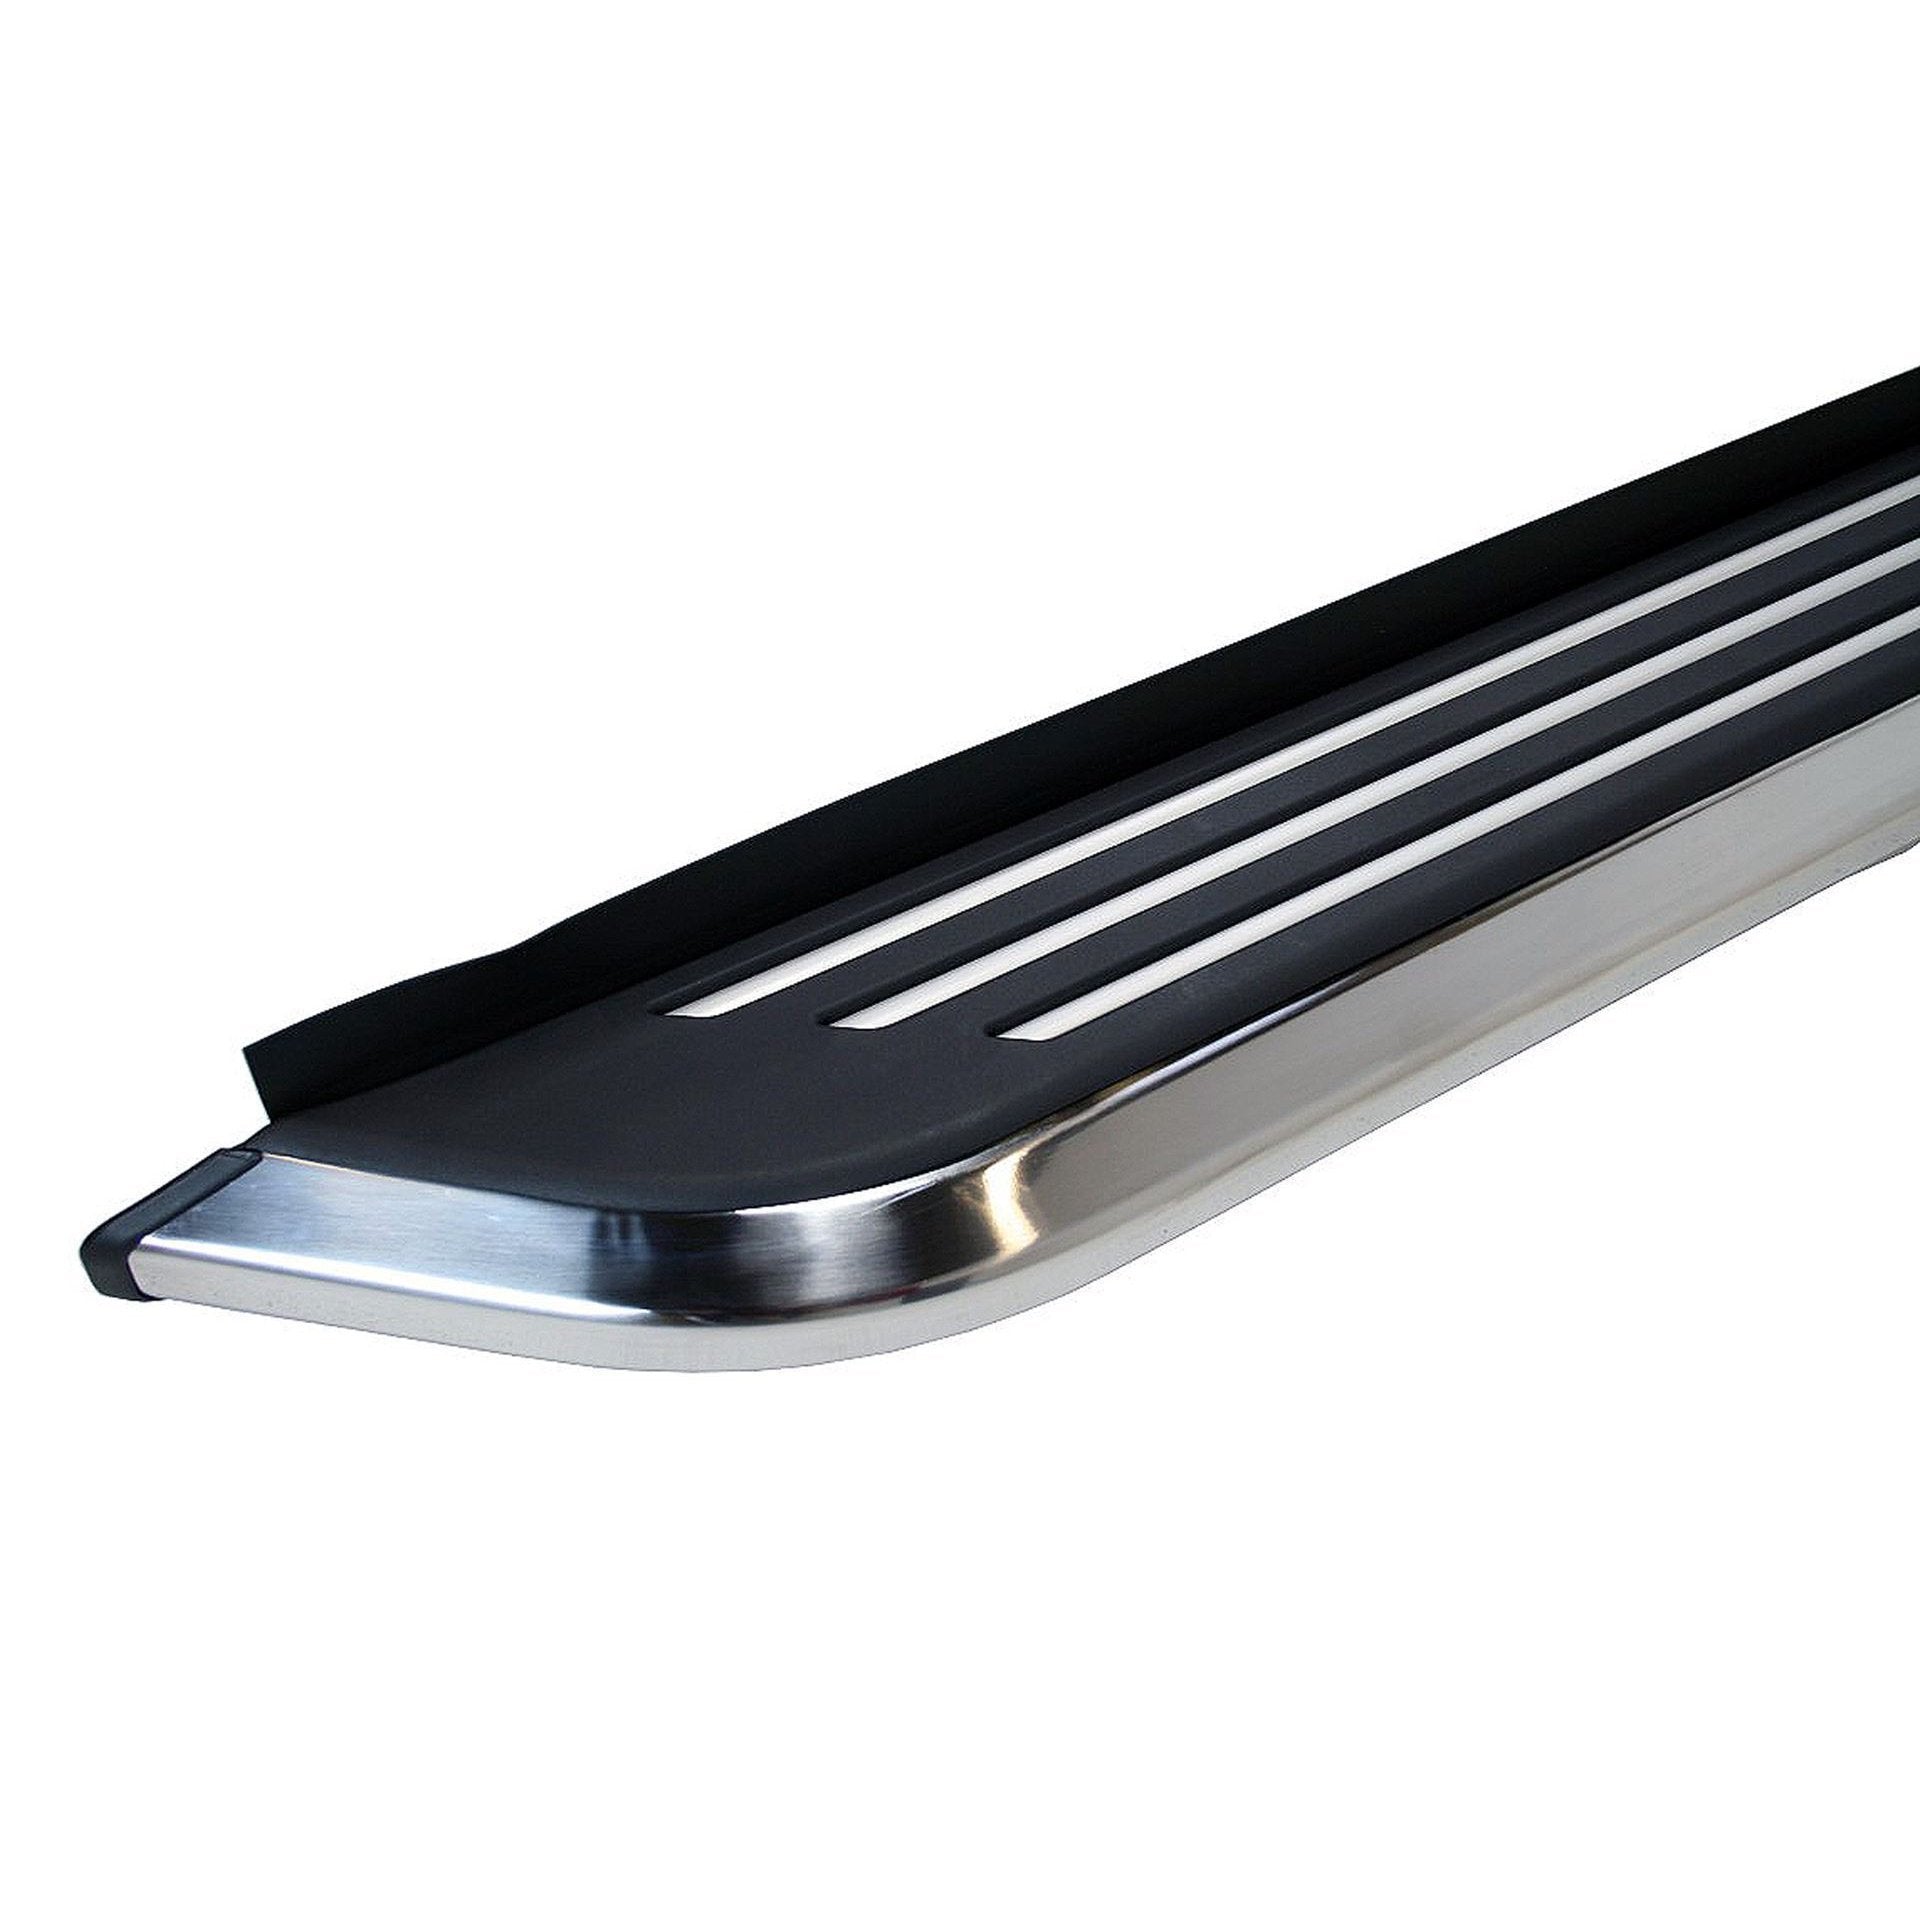 Premier Side Steps Running Boards for Range Rover Evoque Pure & Prestige 11-18 -  - sold by Direct4x4